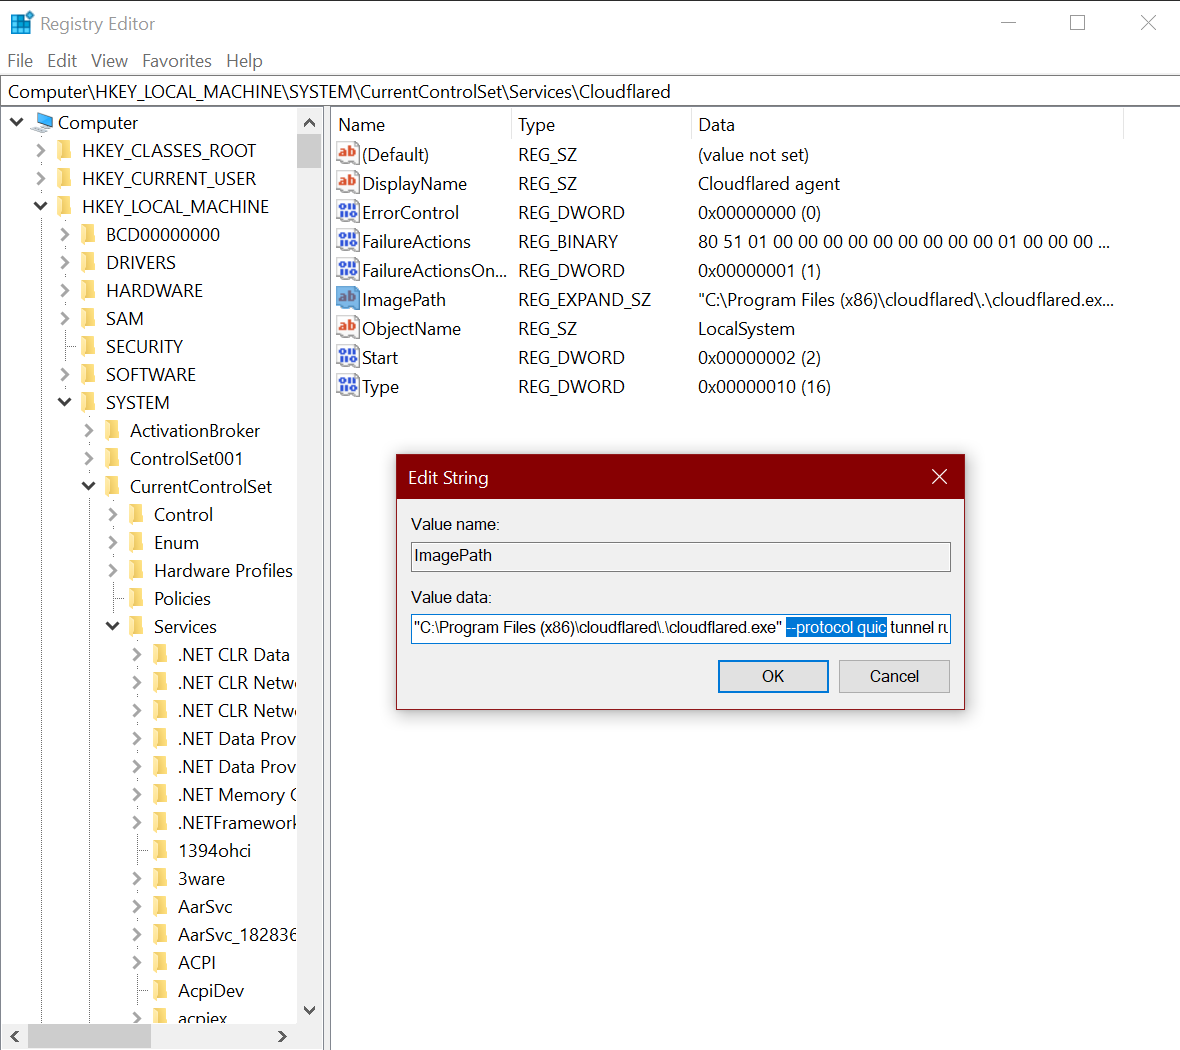 Modify cloudflared service in the Registry Editor